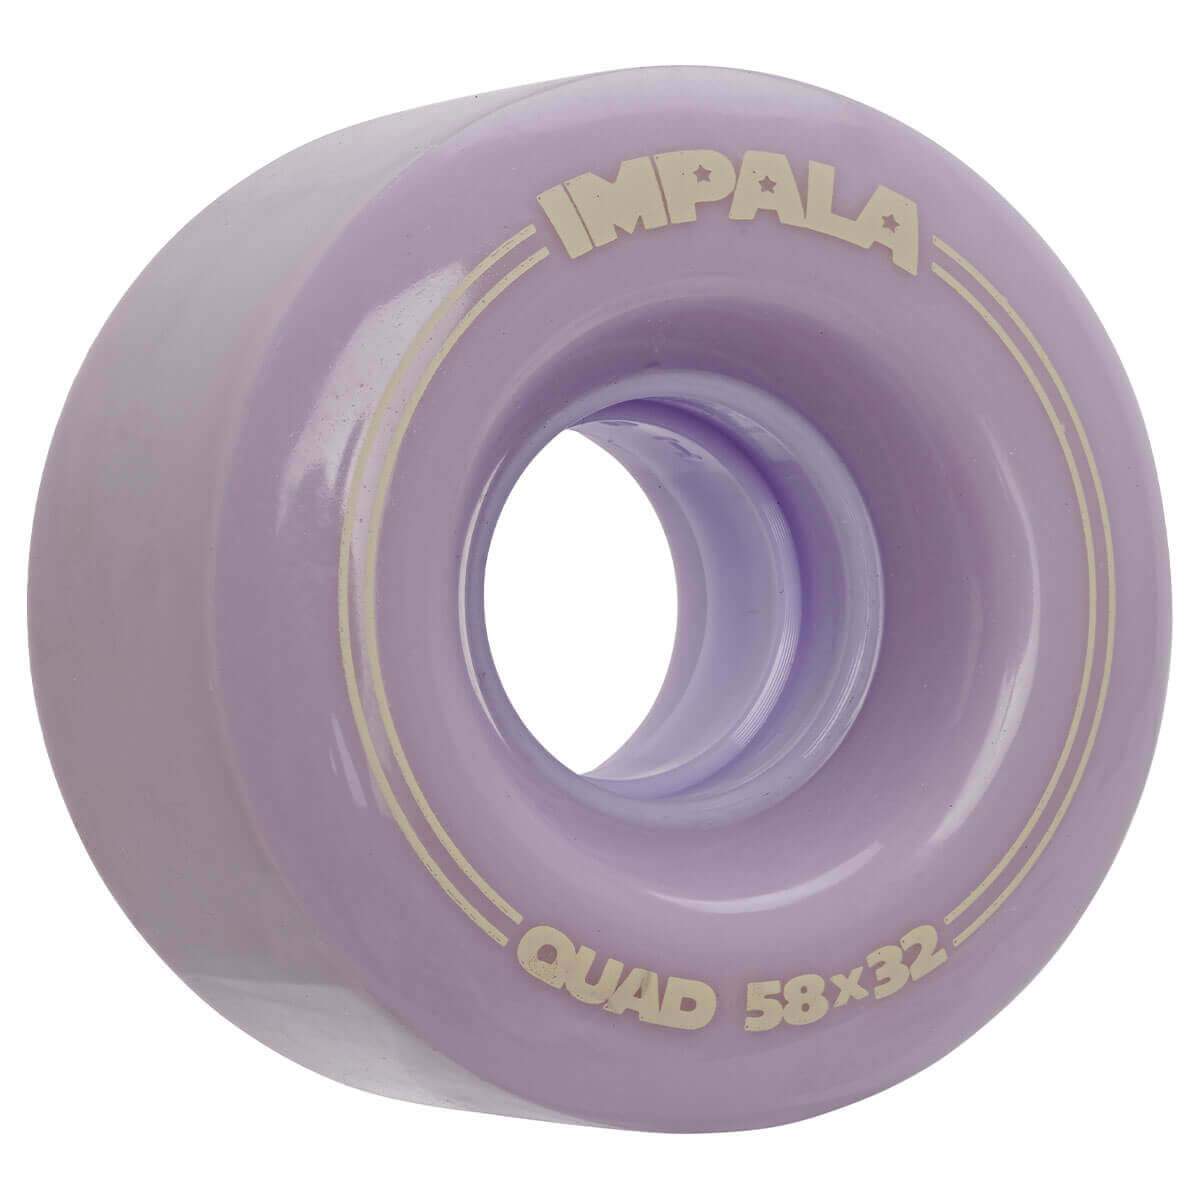 Impala Replacement Wheels (4 Pack)